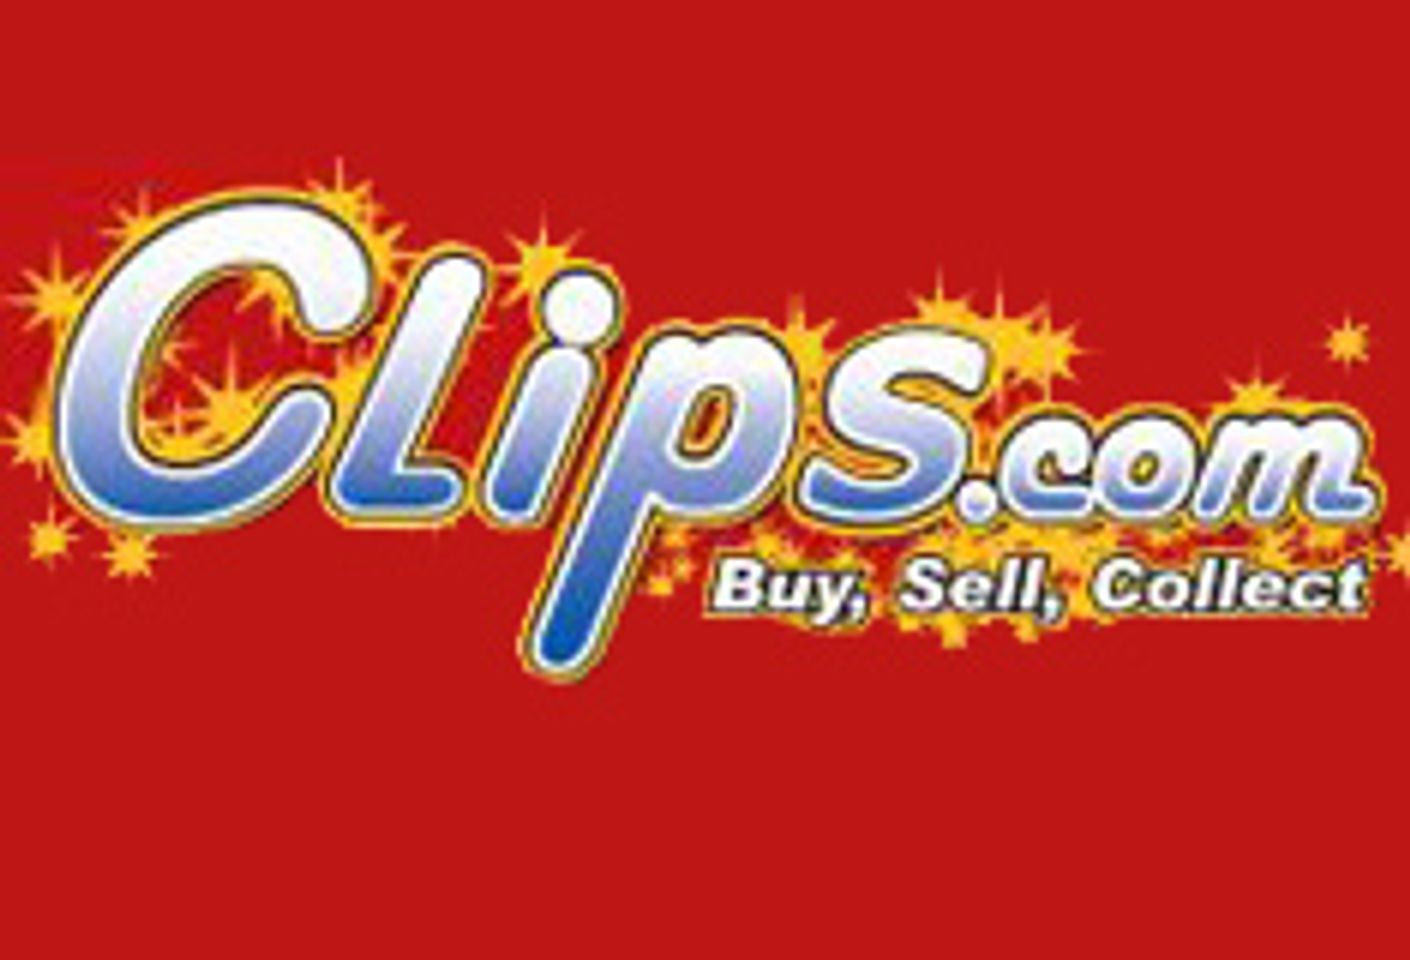 Clips.com Adds New 'Samples' Feature